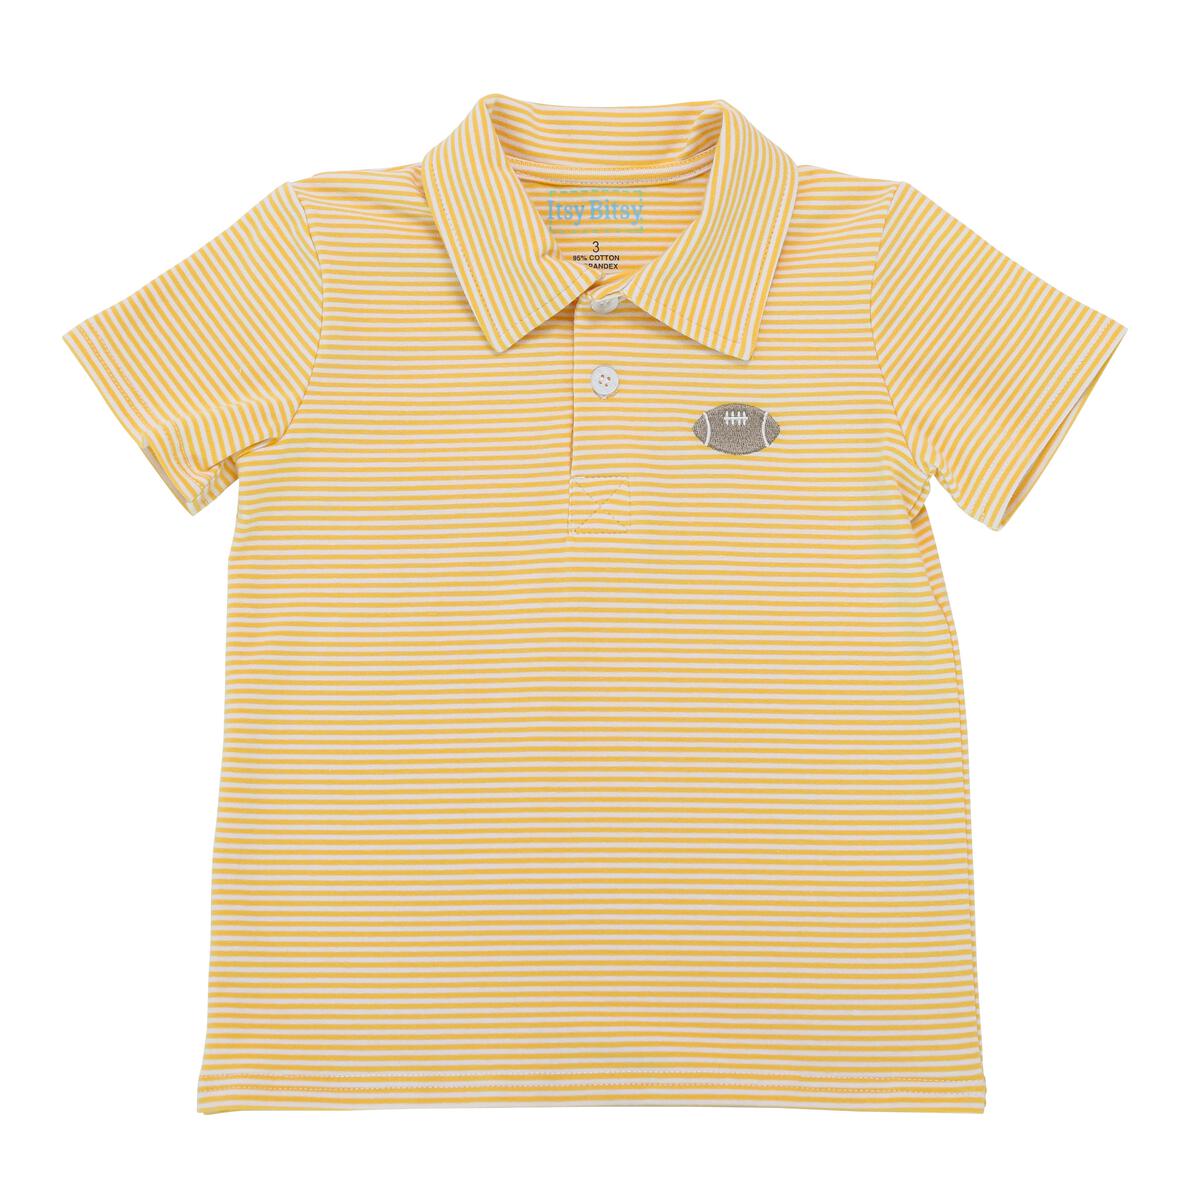 An Itsy Bitsy Football Polo- Yellow Stripe shirt with an embroidered logo.